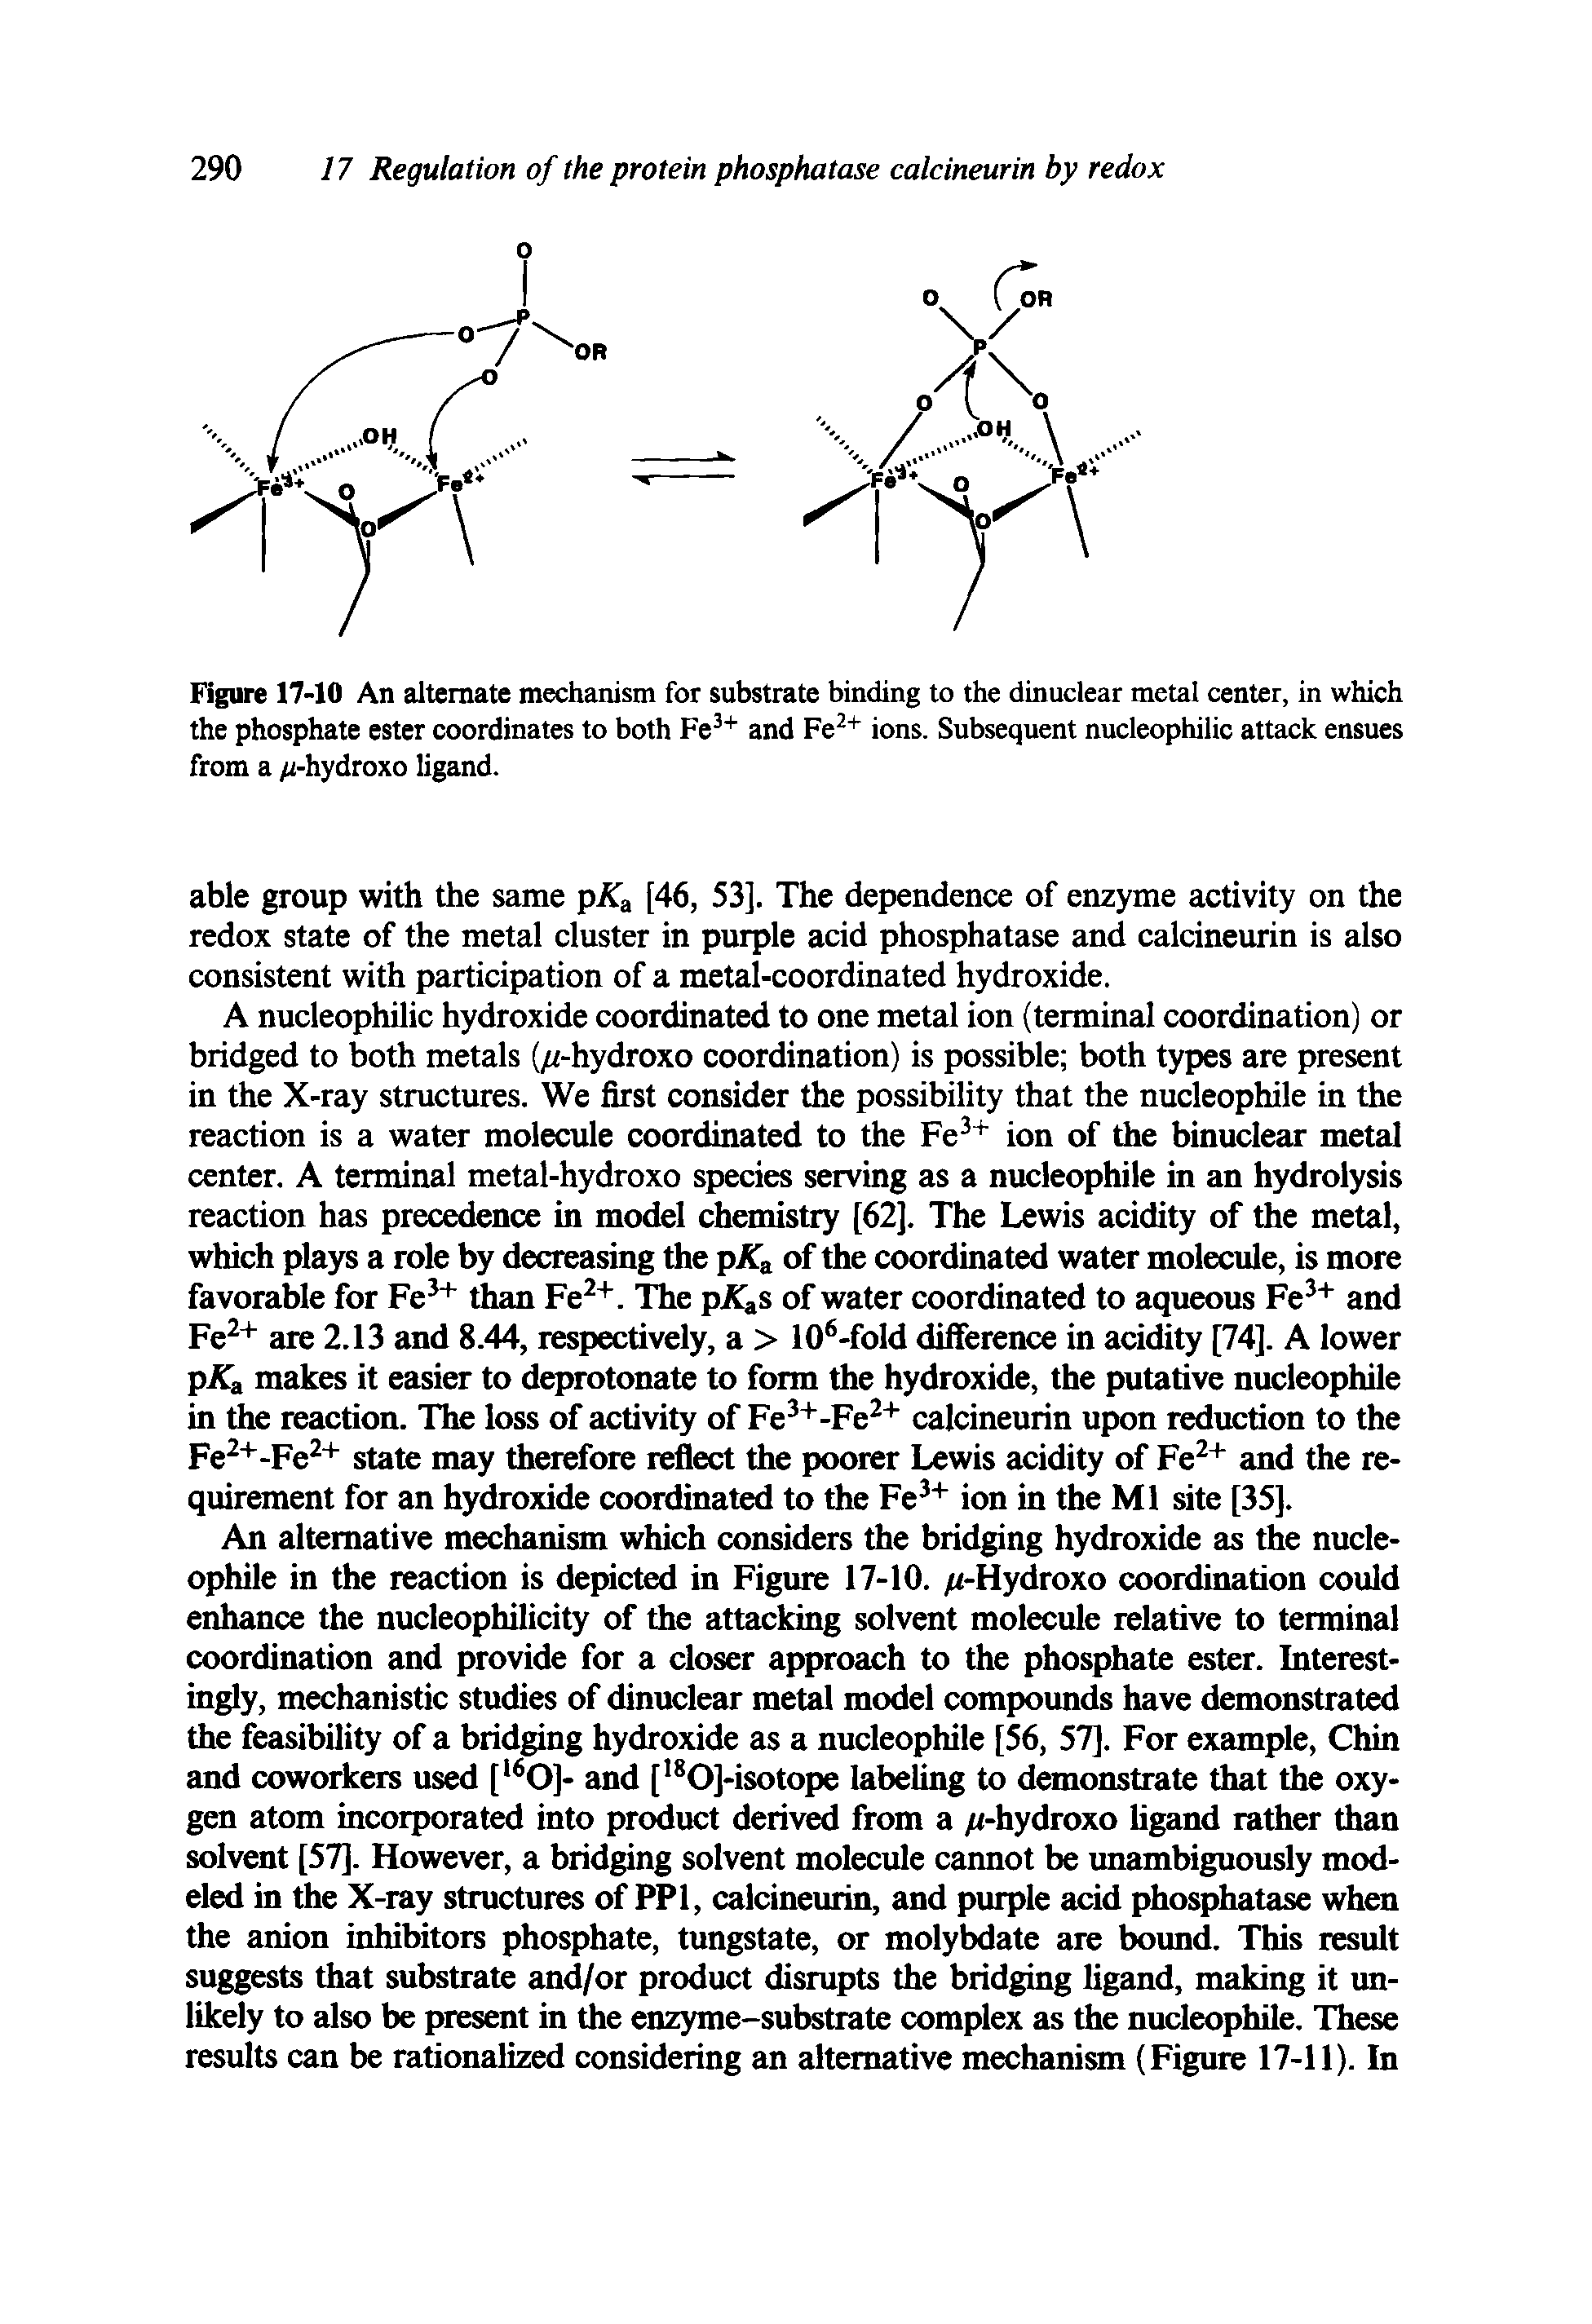 Figure 17-10 An alternate mechanism for substrate binding to the dinuclear metal center, in which the phosphate ester coordinates to both Fe and Fe ions. Subsequent nucleophilic attack ensues from a /i-hydroxo ligand.